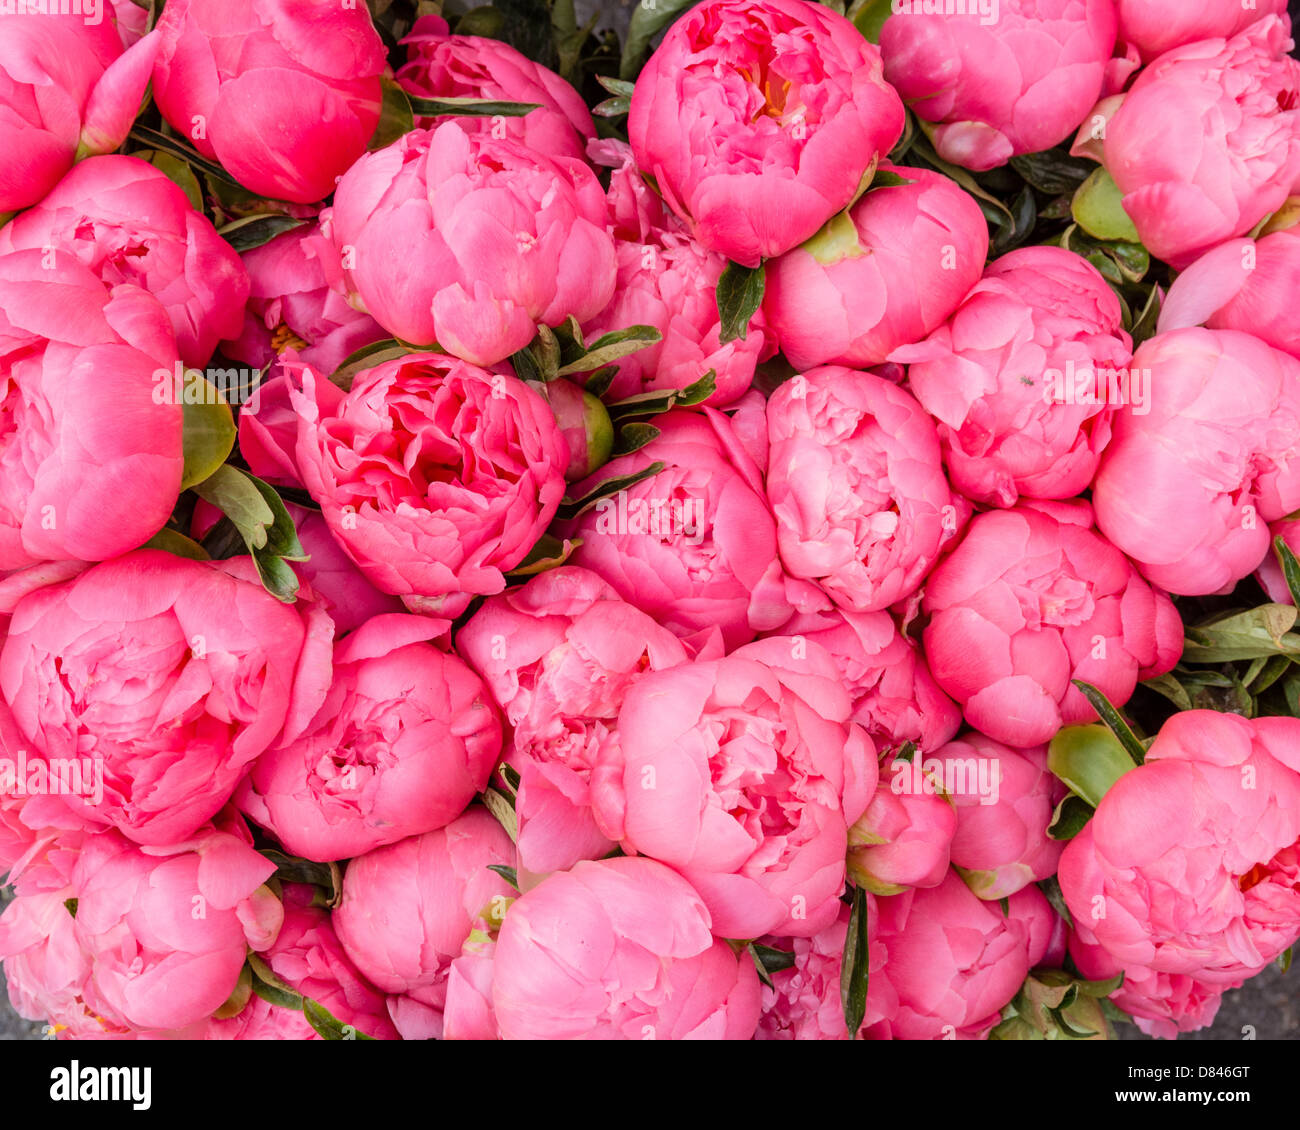 Freshly picked bouquet of peony flowers on display at the farmers market.  These freshly picked pink peony flowers filled an entire display for frothy pink beauty. Stock Photo